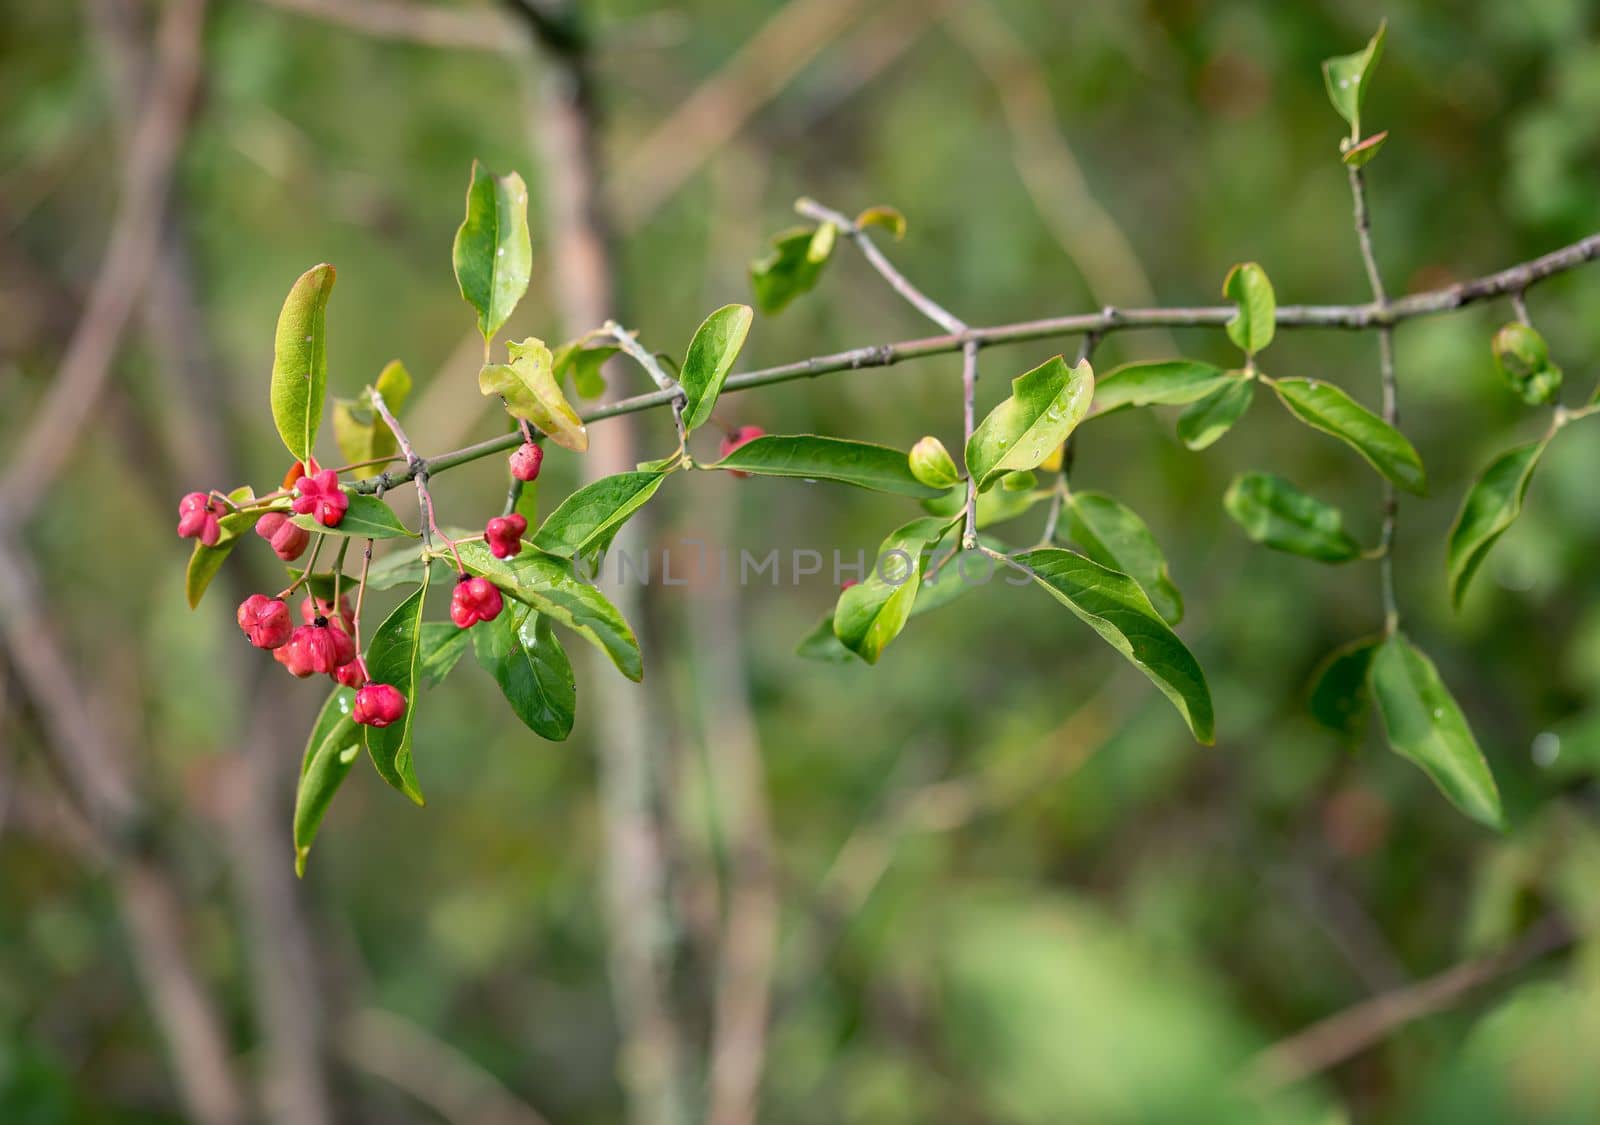 Euonymus europaeus, red fruits on a twig by MaxalTamor